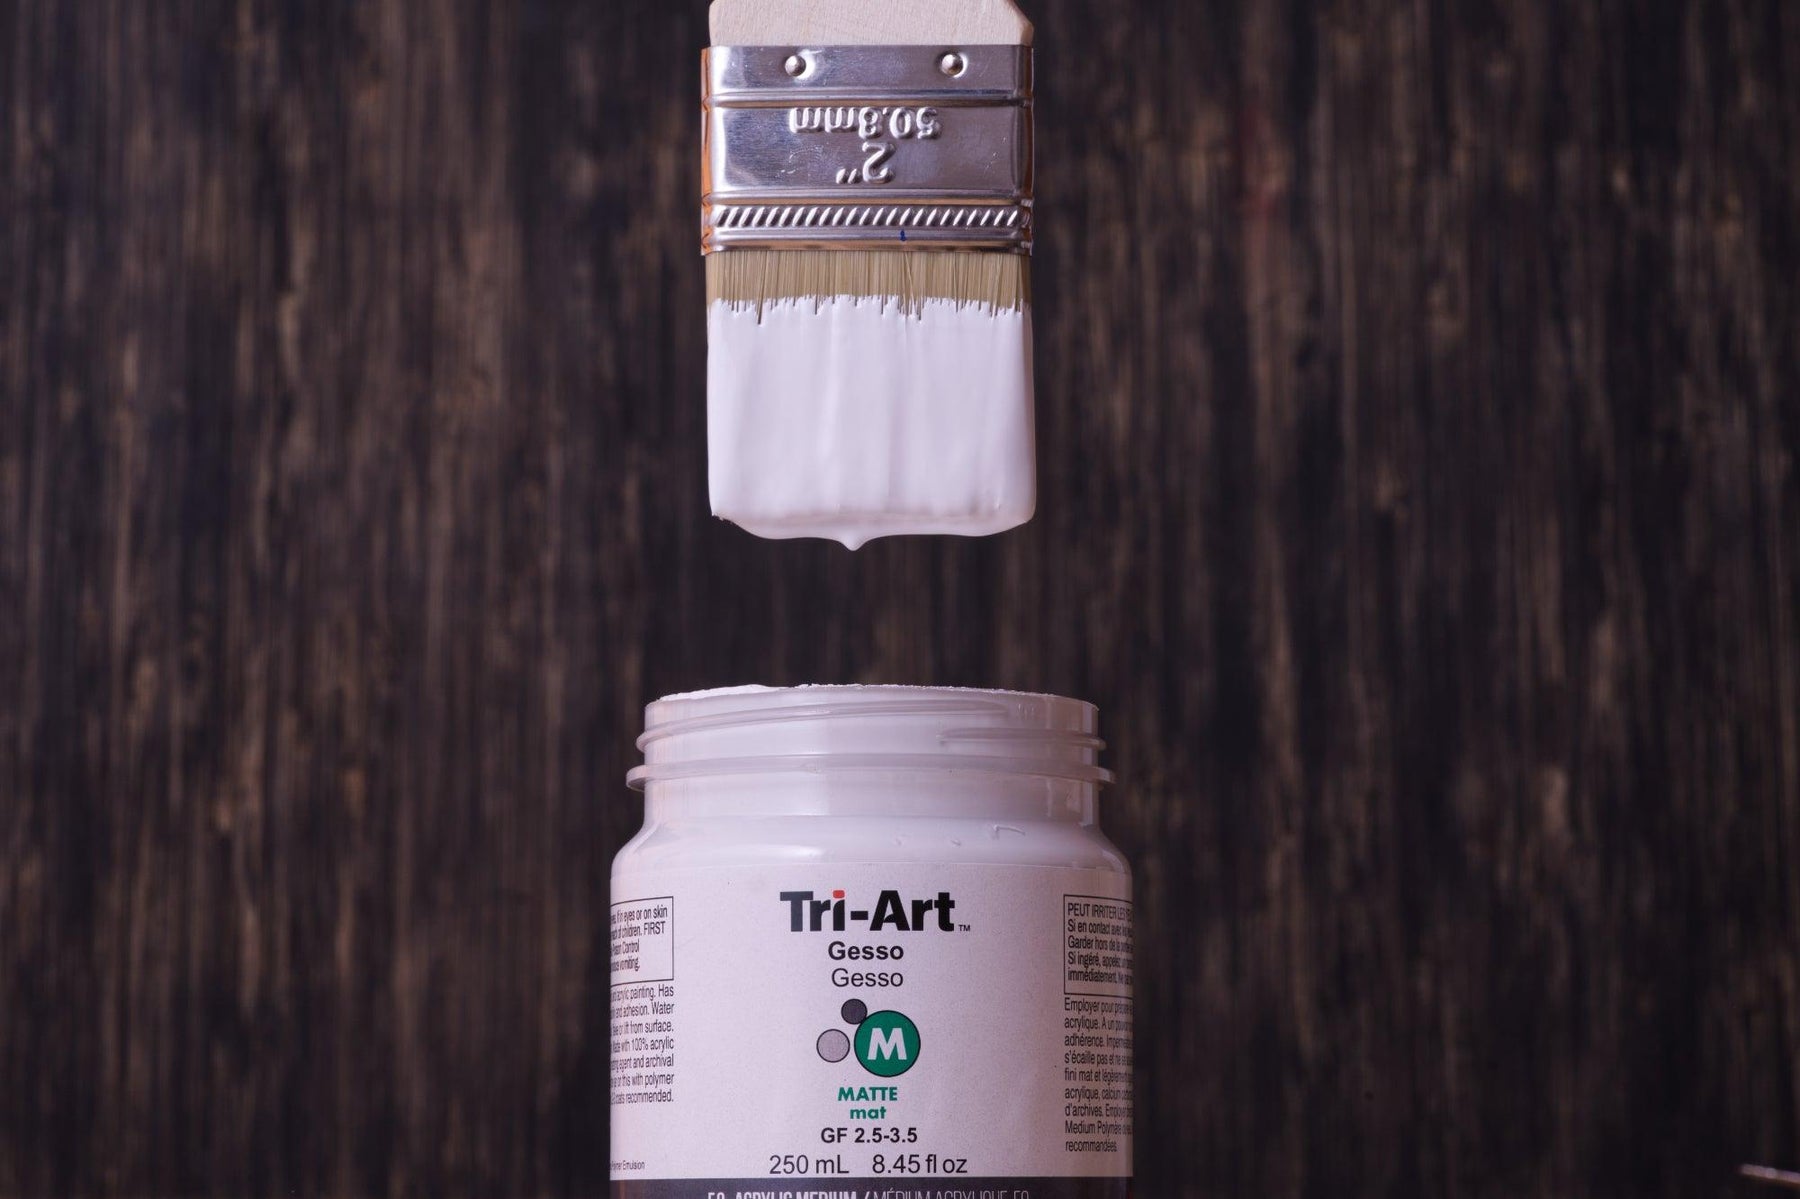 Tri-Art : Crackle Ground : 500ml - Acrylic Primer - Gesso, Grounds and  Primers - Sundries - Studio